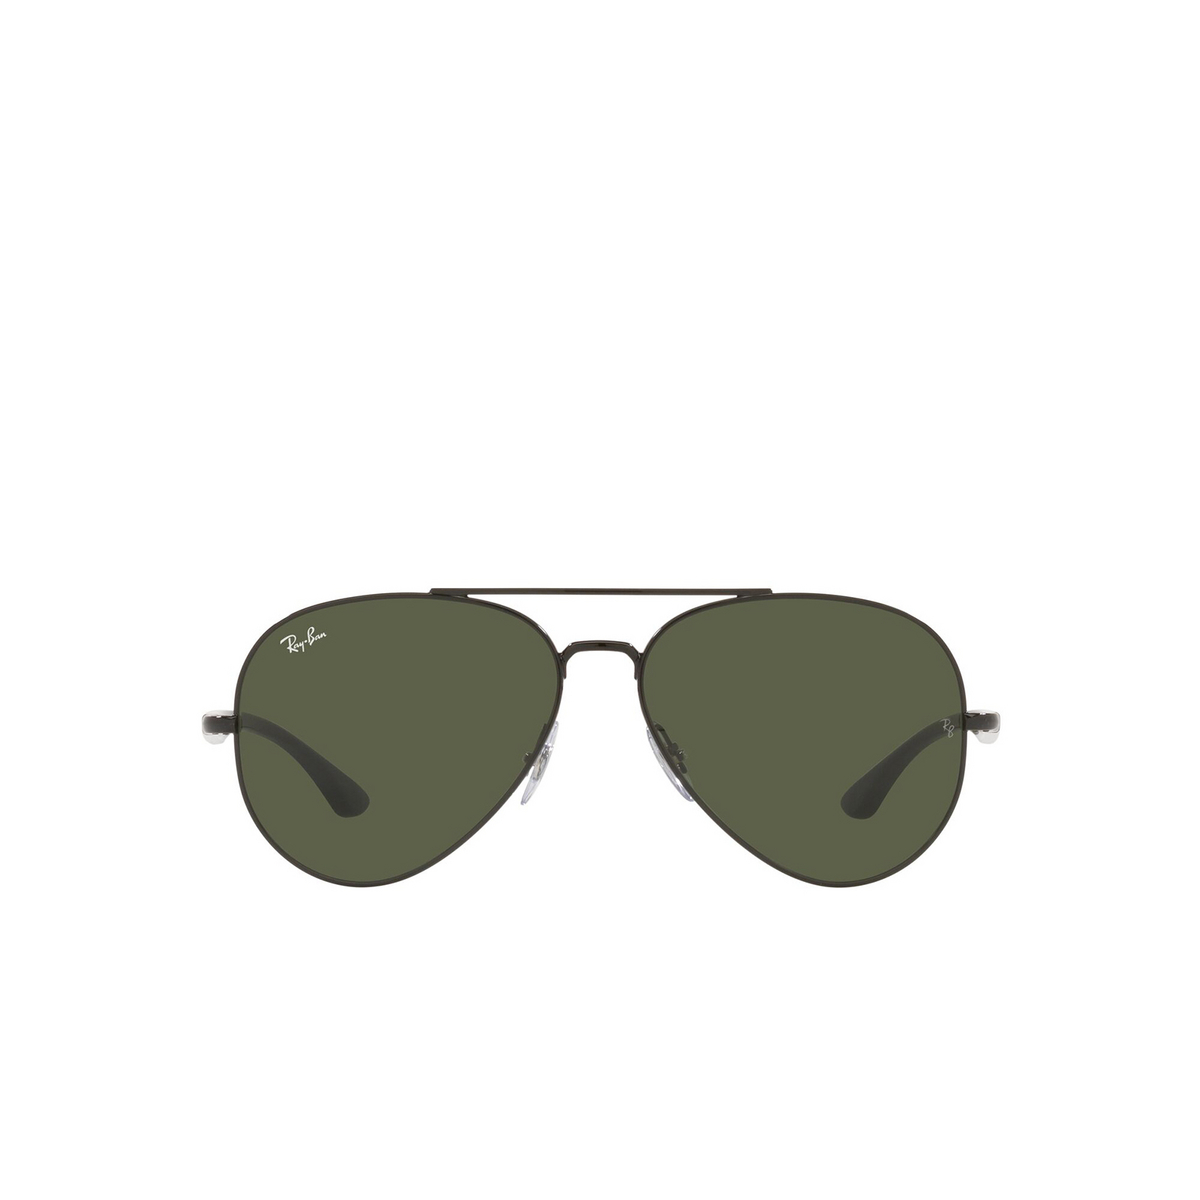 Ray-Ban® Aviator Sunglasses: RB3675 color Black 002/31 - front view.